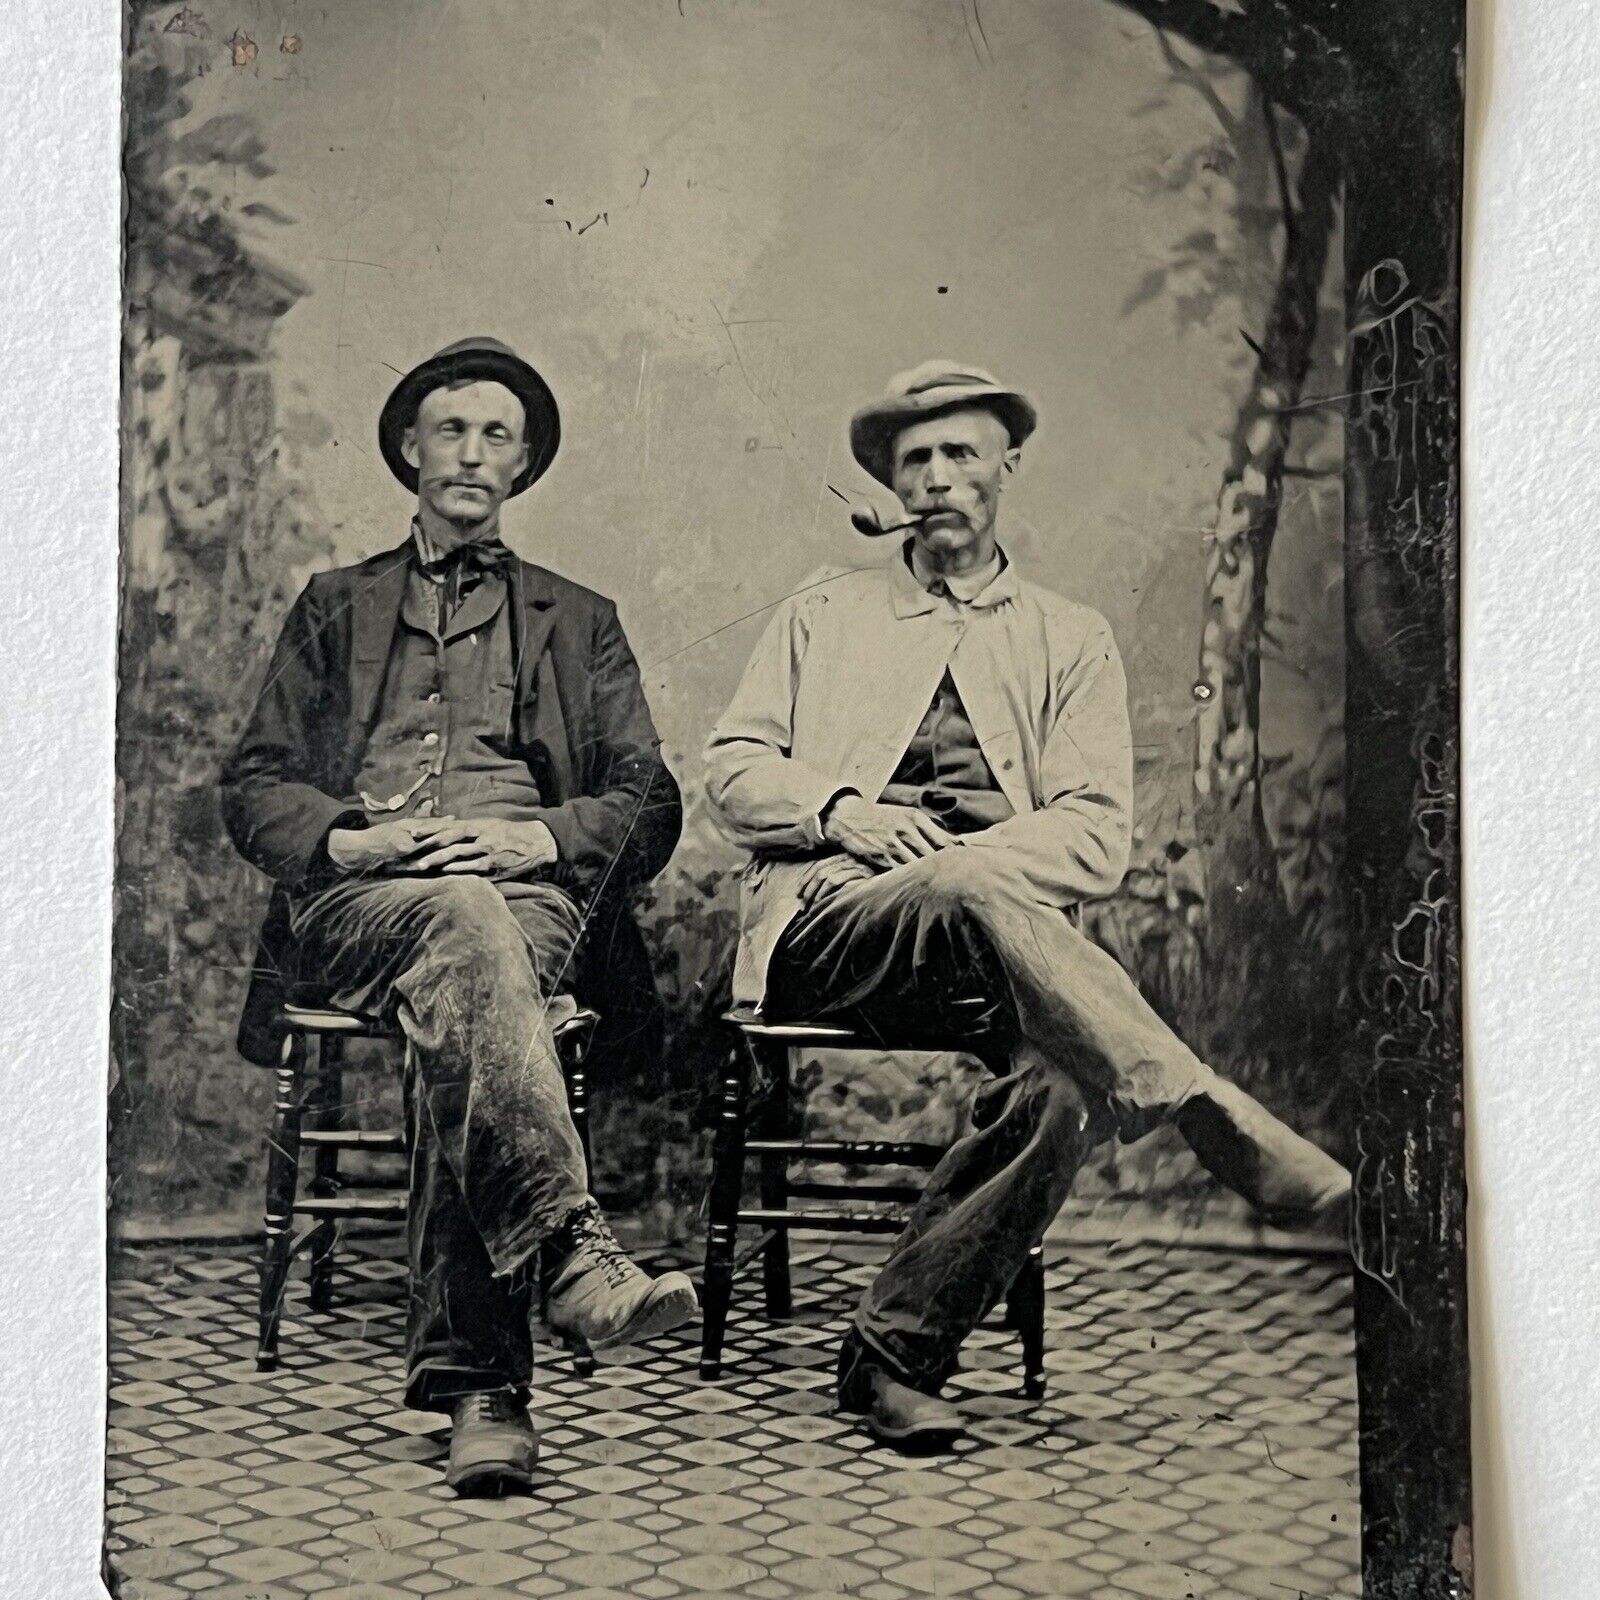 Antique Tintype Photograph Handsome Men Rascally Fellows Pipe In Mouth & Boots